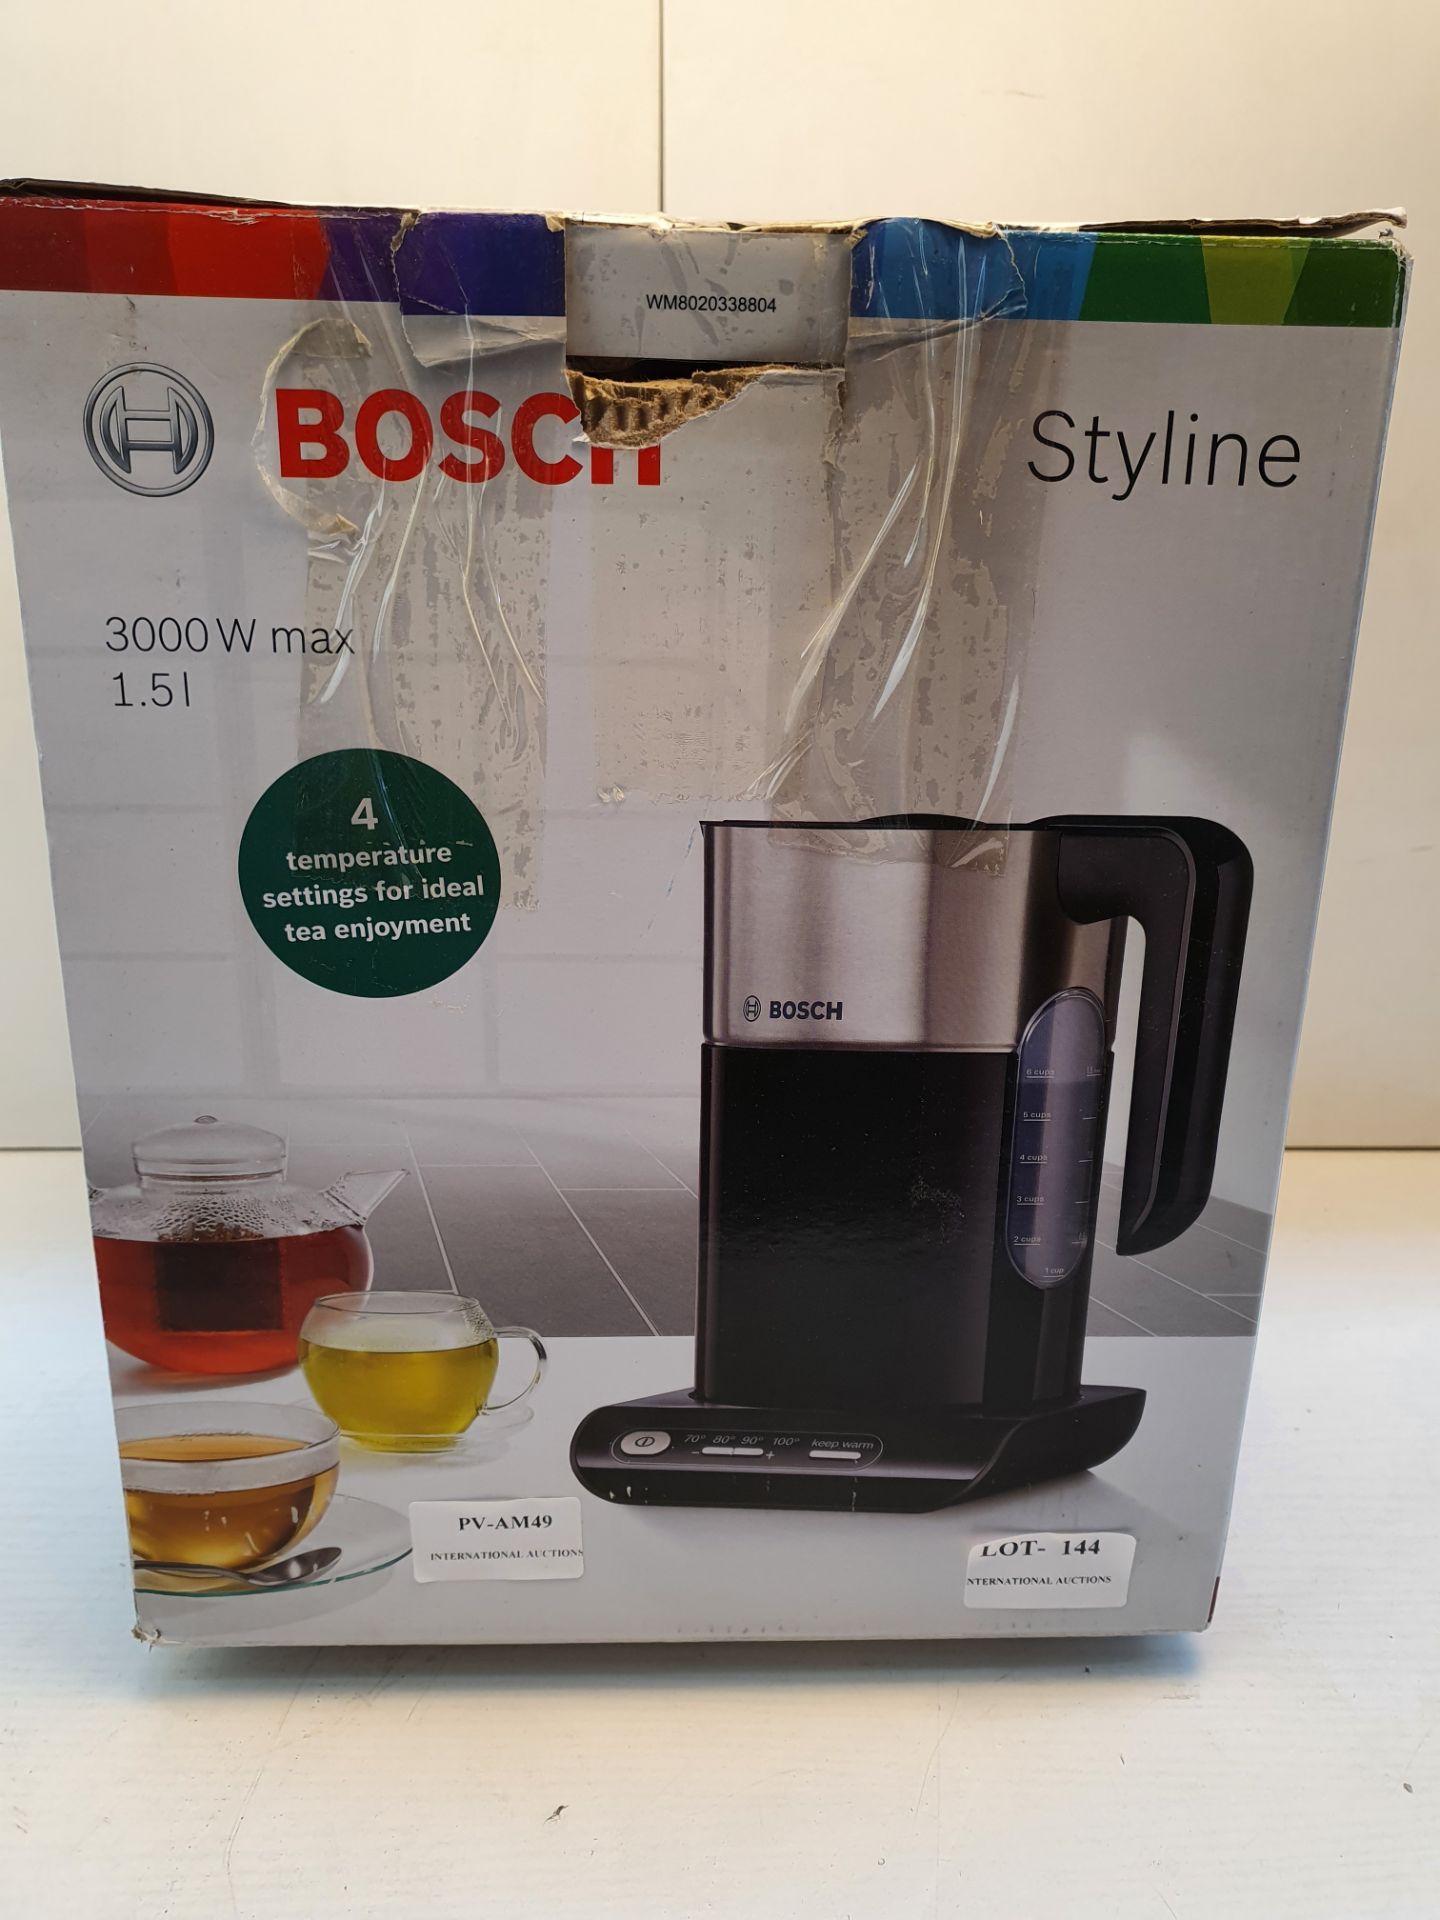 BOXED BOSCH STYLINE 1.5L KETTLE RRP £69.99Condition ReportAppraisal Available on Request- All